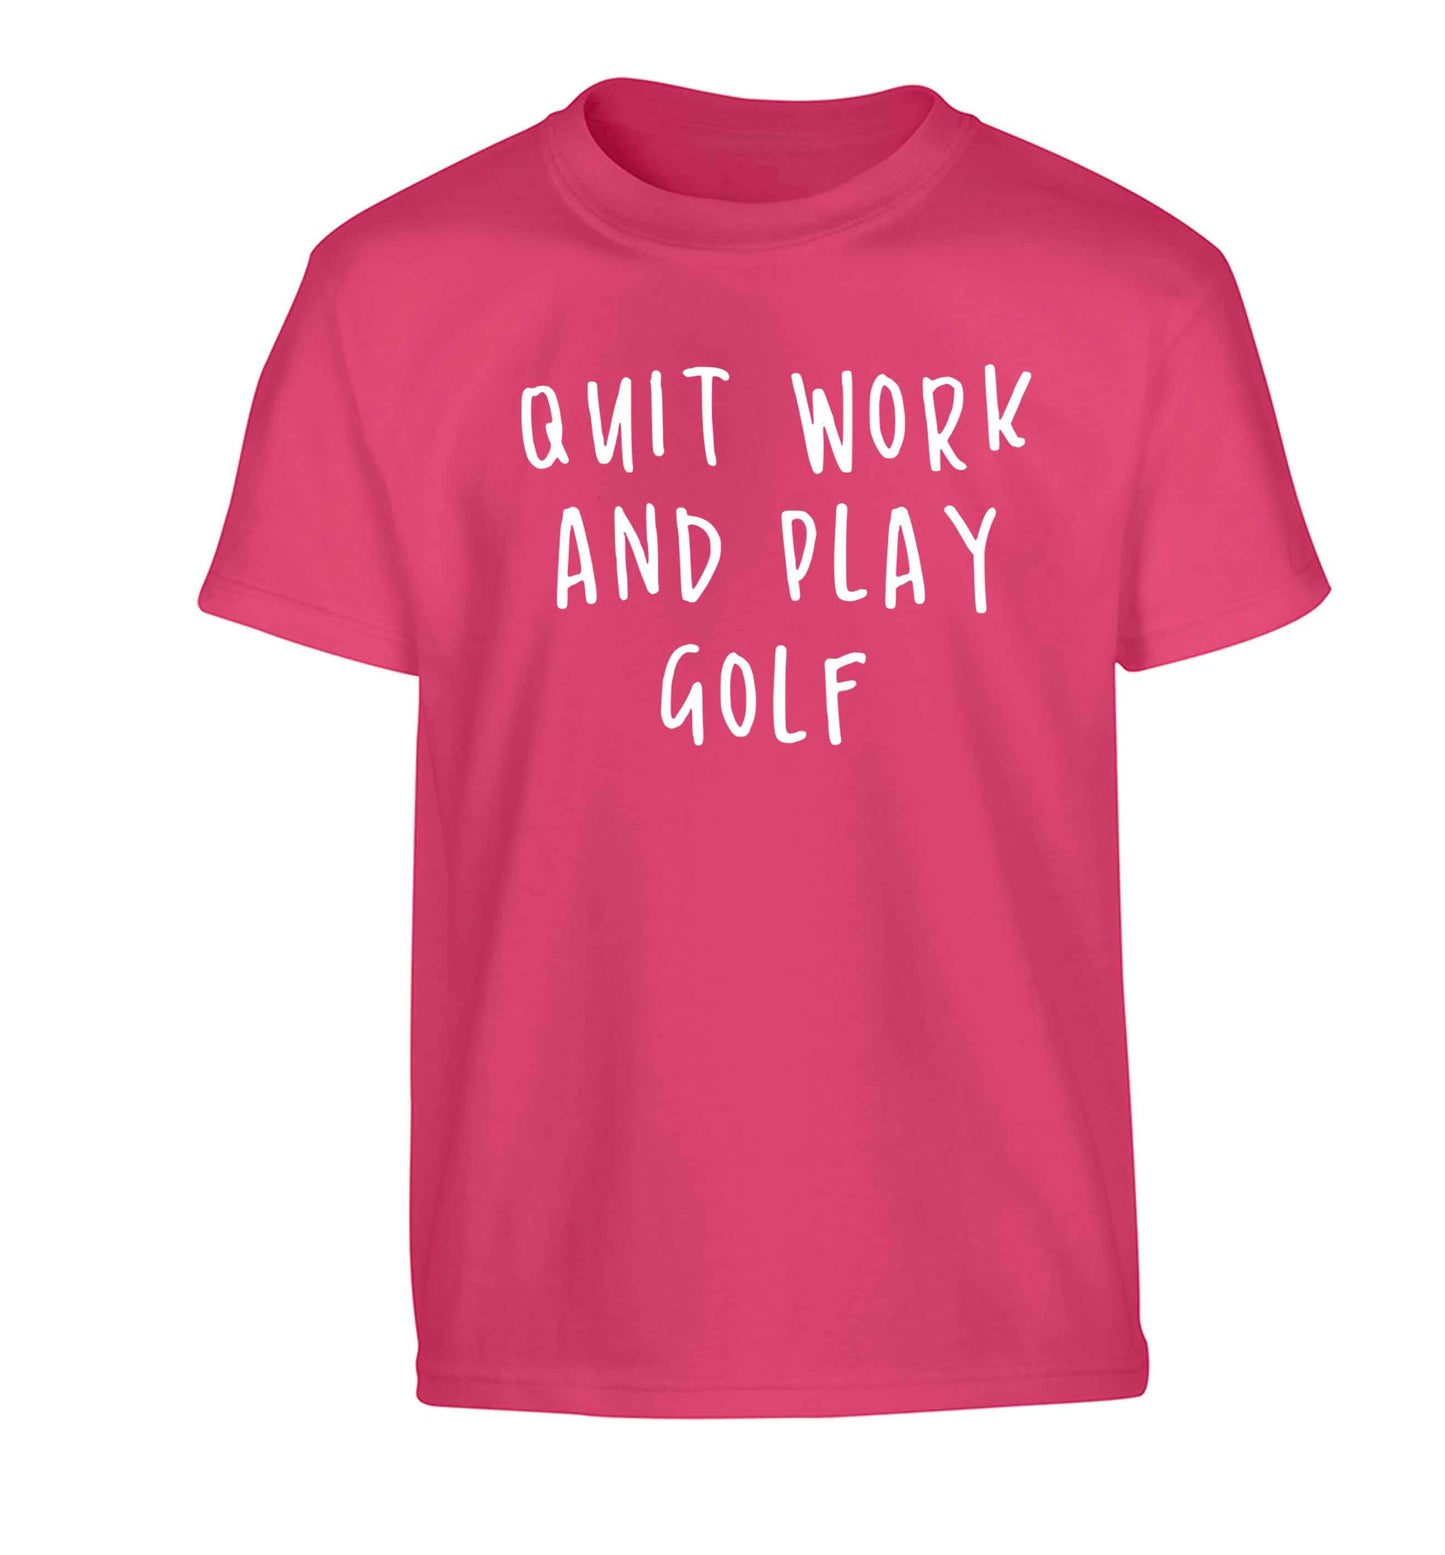 Quit work and play golf Children's pink Tshirt 12-13 Years